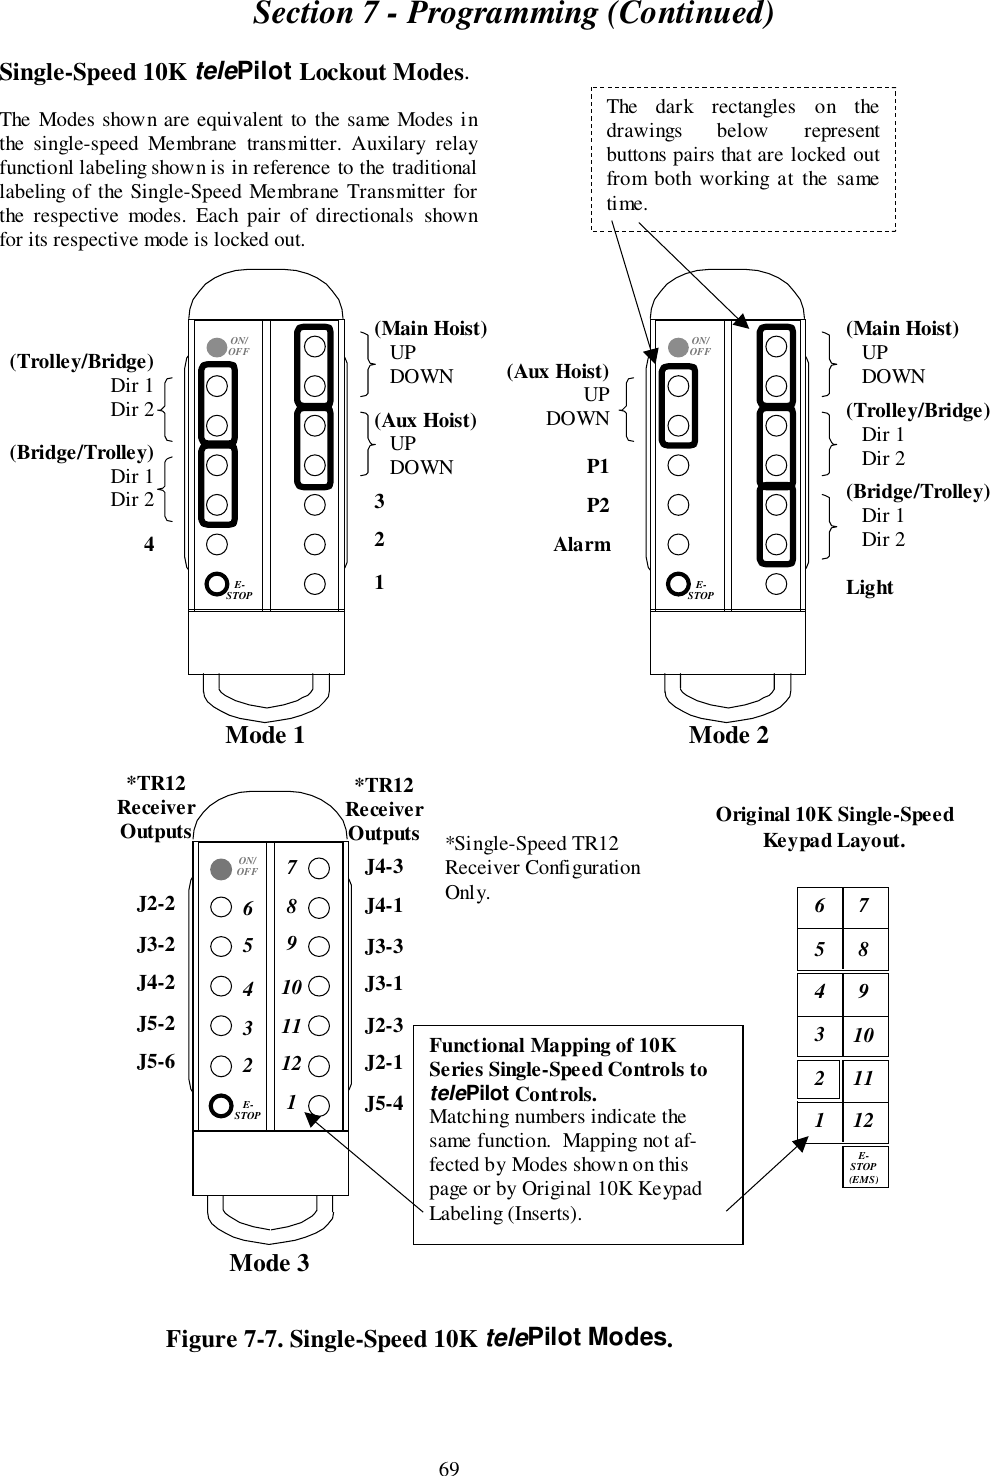 Section 7 - Programming (Continued)69Single-Speed 10K telePilot Lockout Modes.The Modes shown are equivalent to the same Modes inthe single-speed Membrane transmitter. Auxilary relayfunctionl labeling shown is in reference to the traditionallabeling of the Single-Speed Membrane Transmitter forthe respective modes. Each pair of directionals shownfor its respective mode is locked out.(Main Hoist)   UP   DOWN(Aux Hoist)   UP   DOWN321 (Trolley/Bridge)   Dir 1   Dir 2(Bridge/Trolley)   Dir 1   Dir 24Figure 7-7. Single-Speed 10K telePilot Modes.Mode 1(Main Hoist)   UP   DOWN(Trolley/Bridge)   Dir 1   Dir 2(Bridge/Trolley)   Dir 1   Dir 2Light (Aux Hoist)   UP   DOWNP1P2AlarmMode 2The dark rectangles on thedrawings below representbuttons pairs that are locked outfrom both working at the sametime.Mode 3ON/OFF65432E-STOP7891011121789101112E-STOP(EMS)654321Functional Mapping of 10KSeries Single-Speed Controls totelePilot Controls.Matching numbers indicate thesame function.  Mapping not af-fected by Modes shown on thispage or by Original 10K KeypadLabeling (Inserts).Original 10K Single-SpeedKeypad Layout.*TR12ReceiverOutputsJ2-2J3-2J4-2J5-2J5-6*TR12ReceiverOutputsJ4-3J4-1J3-3J3-1J2-3J2-1J5-4*Single-Speed TR12Receiver ConfigurationOnly.ON/OFFE-STOPON/OFFE-STOP